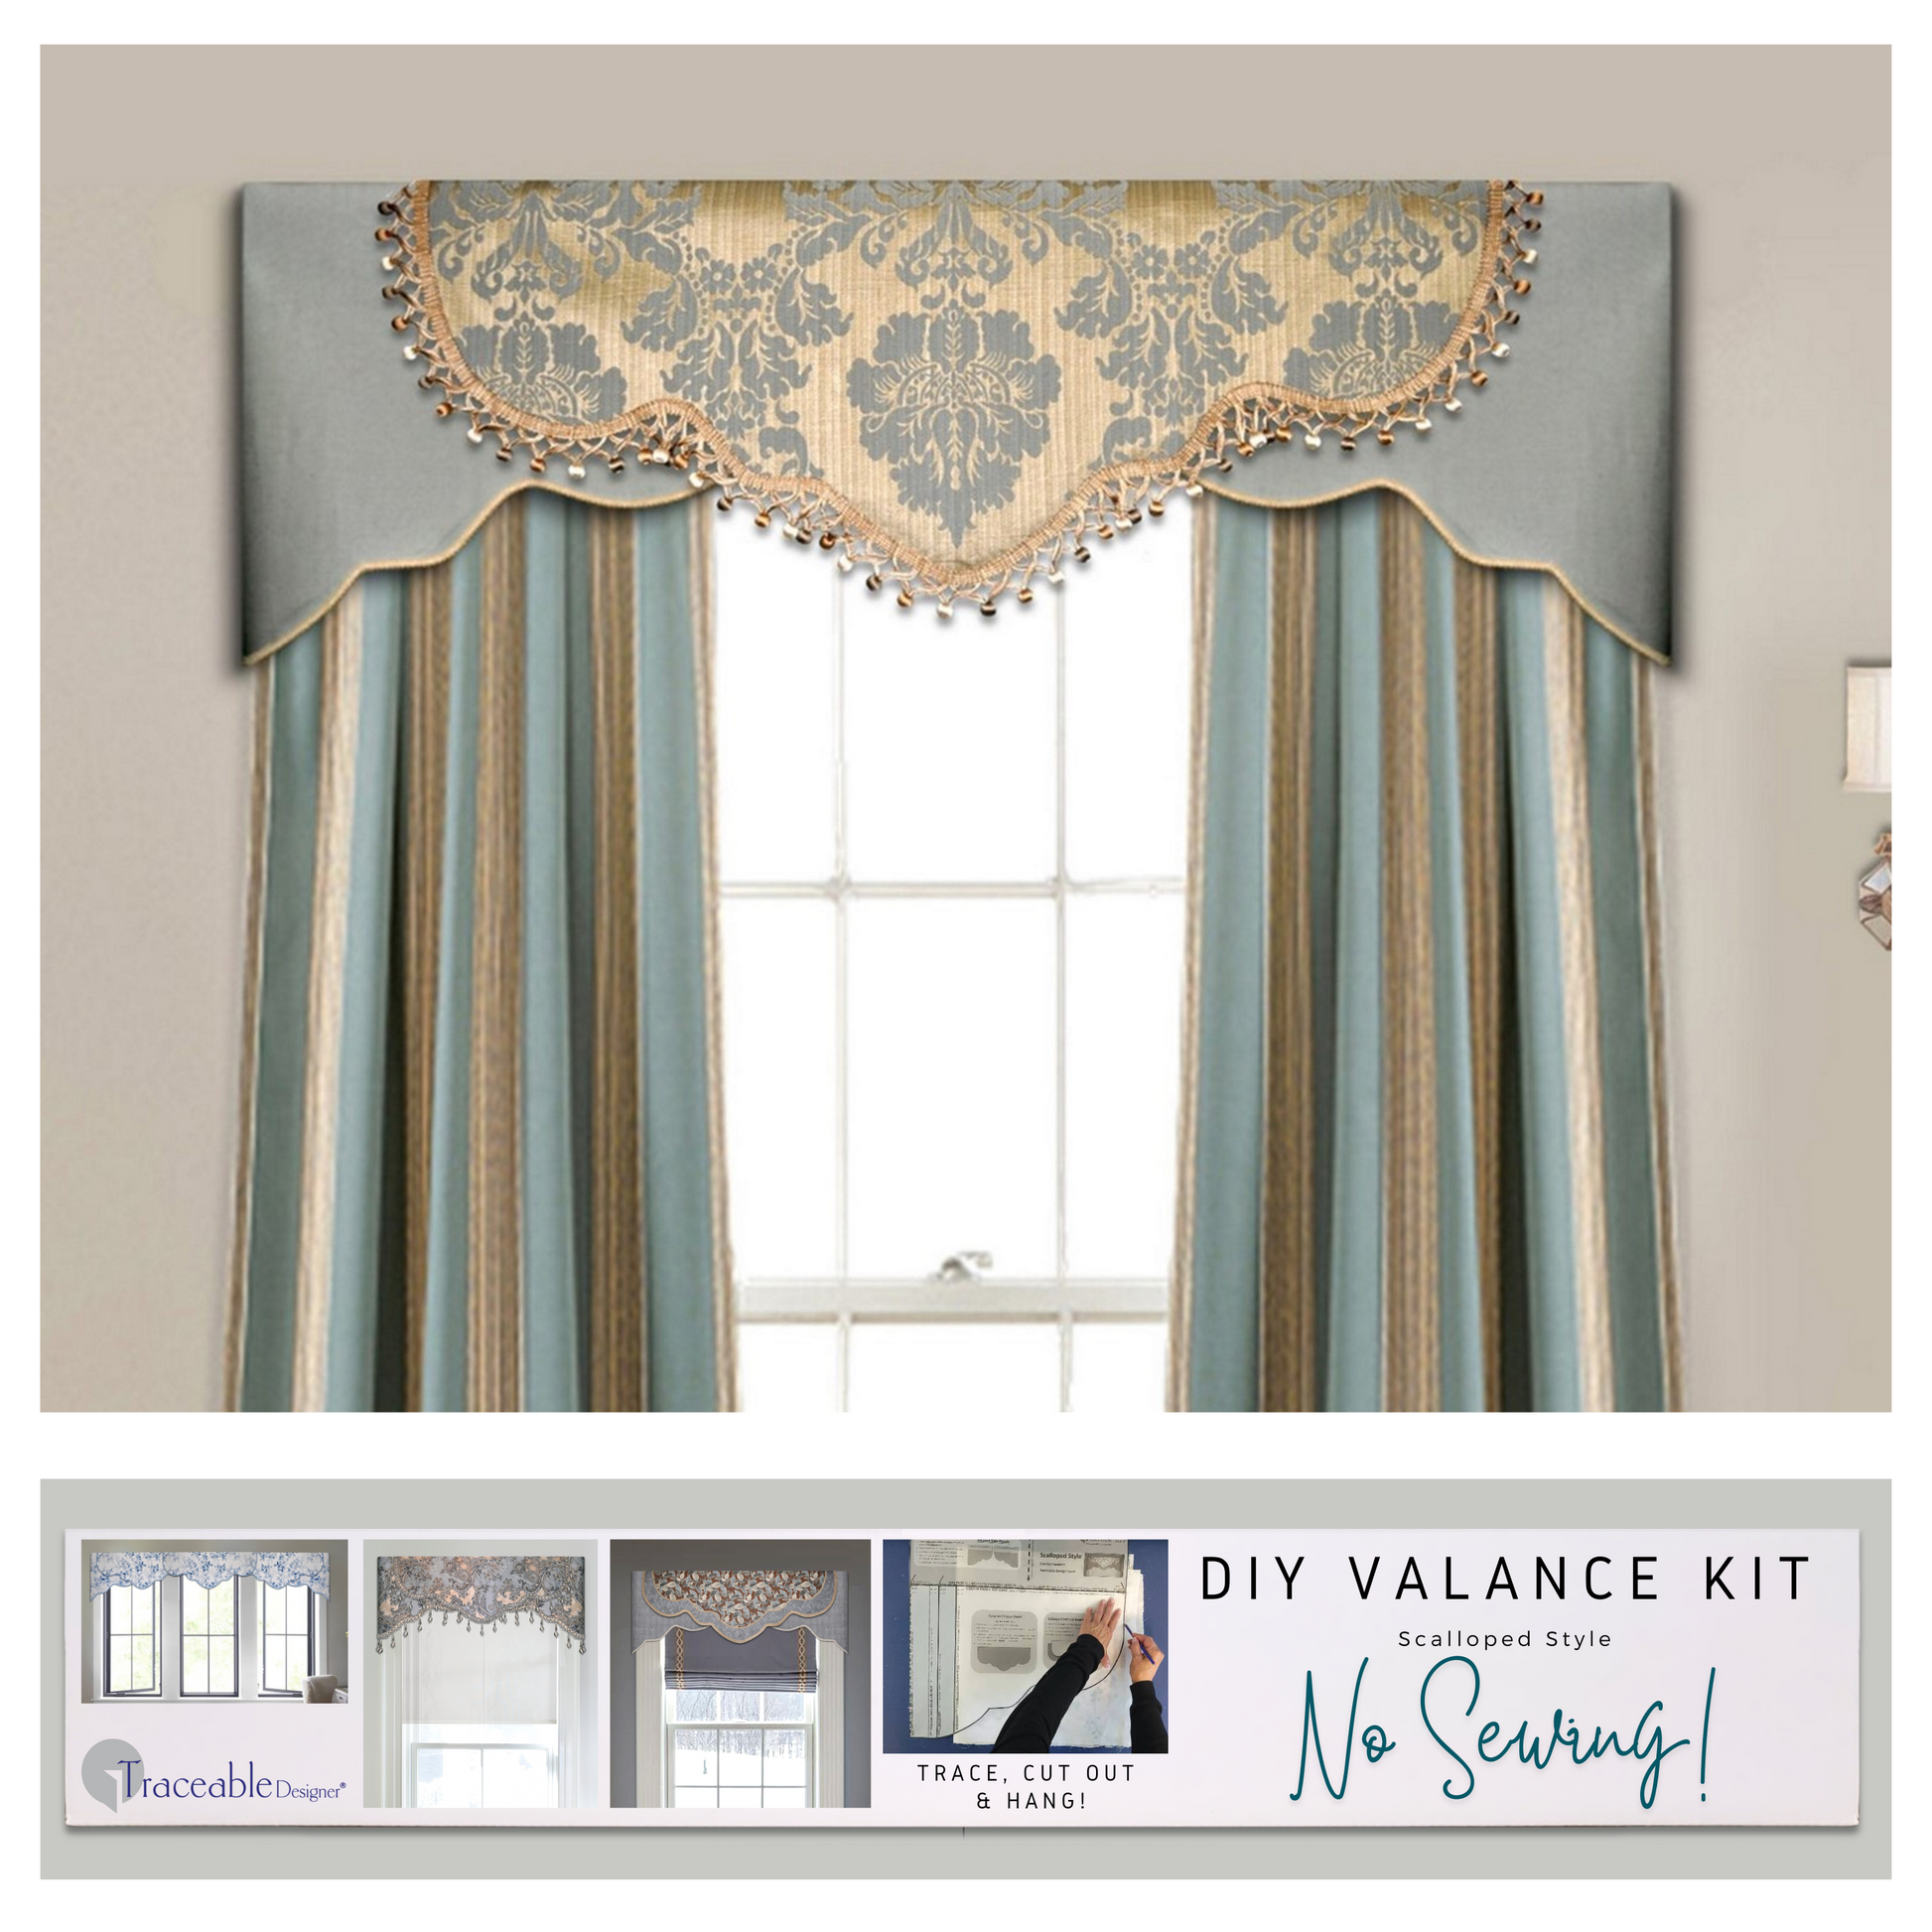 Traceable Designer no-sew scalloped style valance kit for DIY window decorating. Fit all window sizes including bay windows. Hang using a rod pocket. 